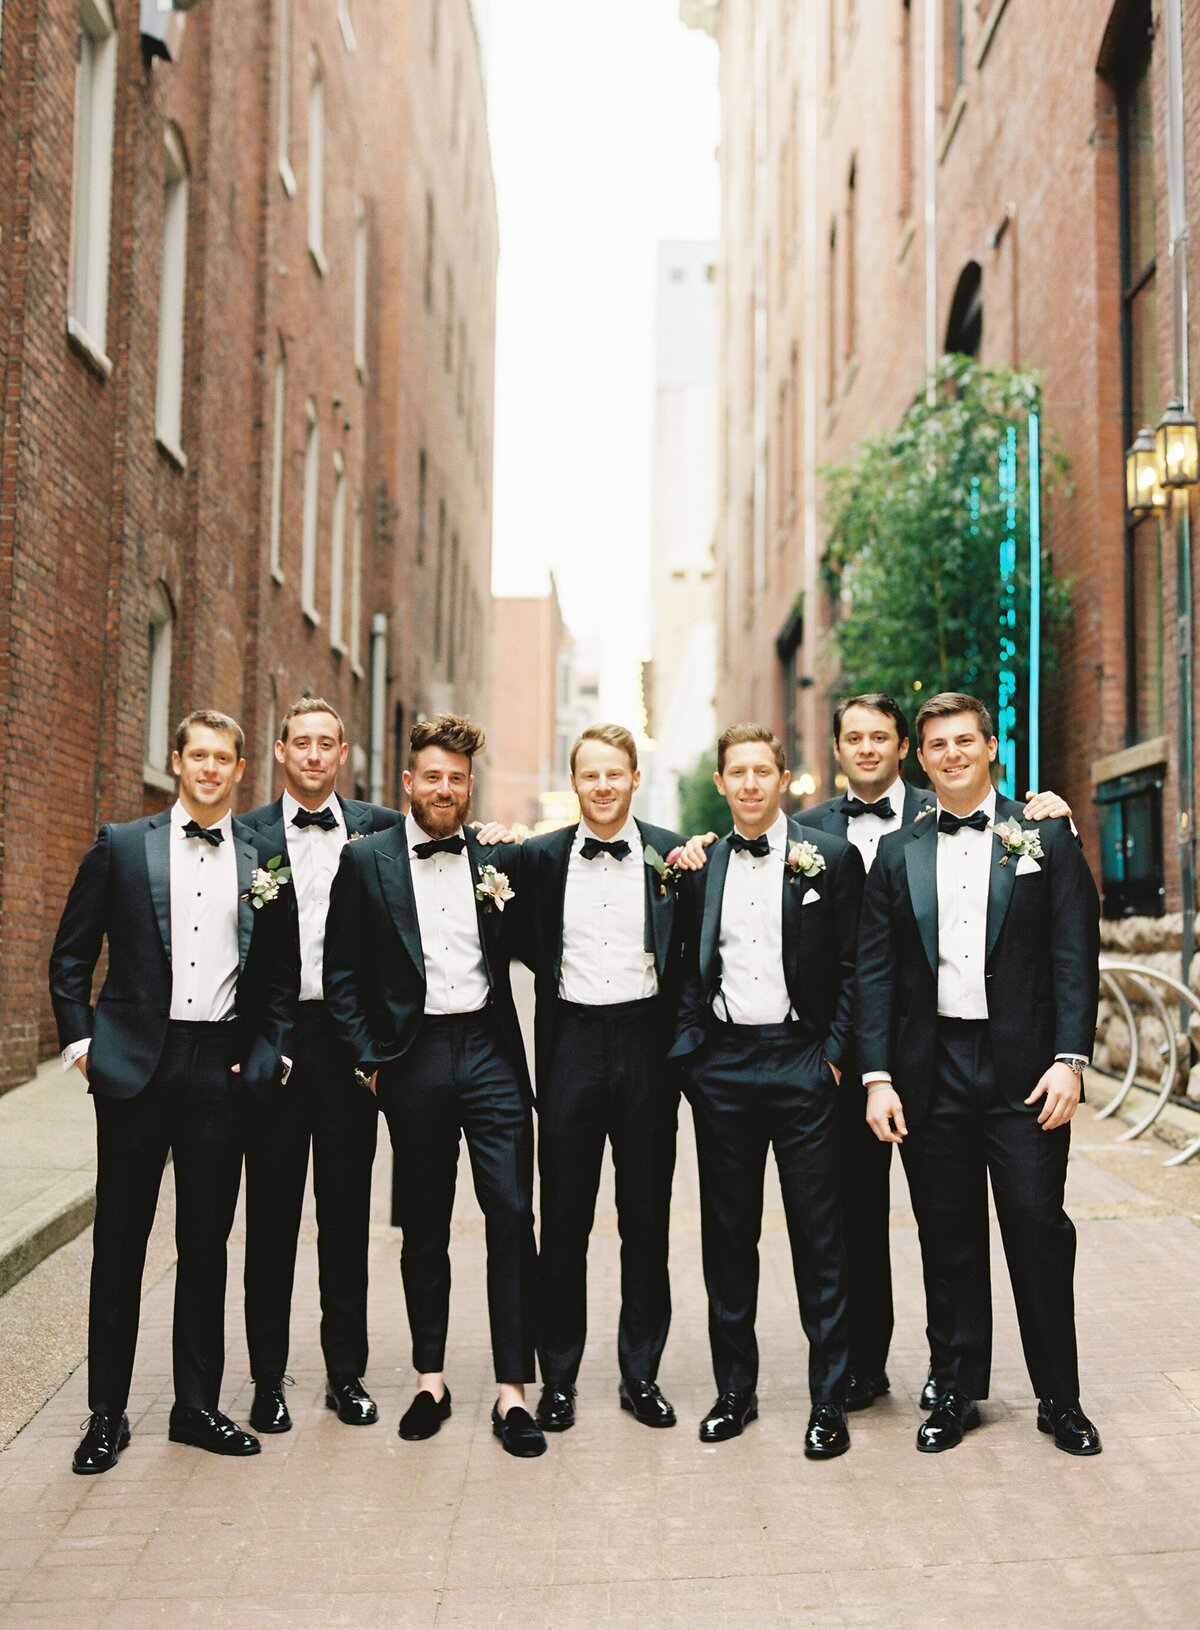 Jaryd + Camille - Bridal Party-030